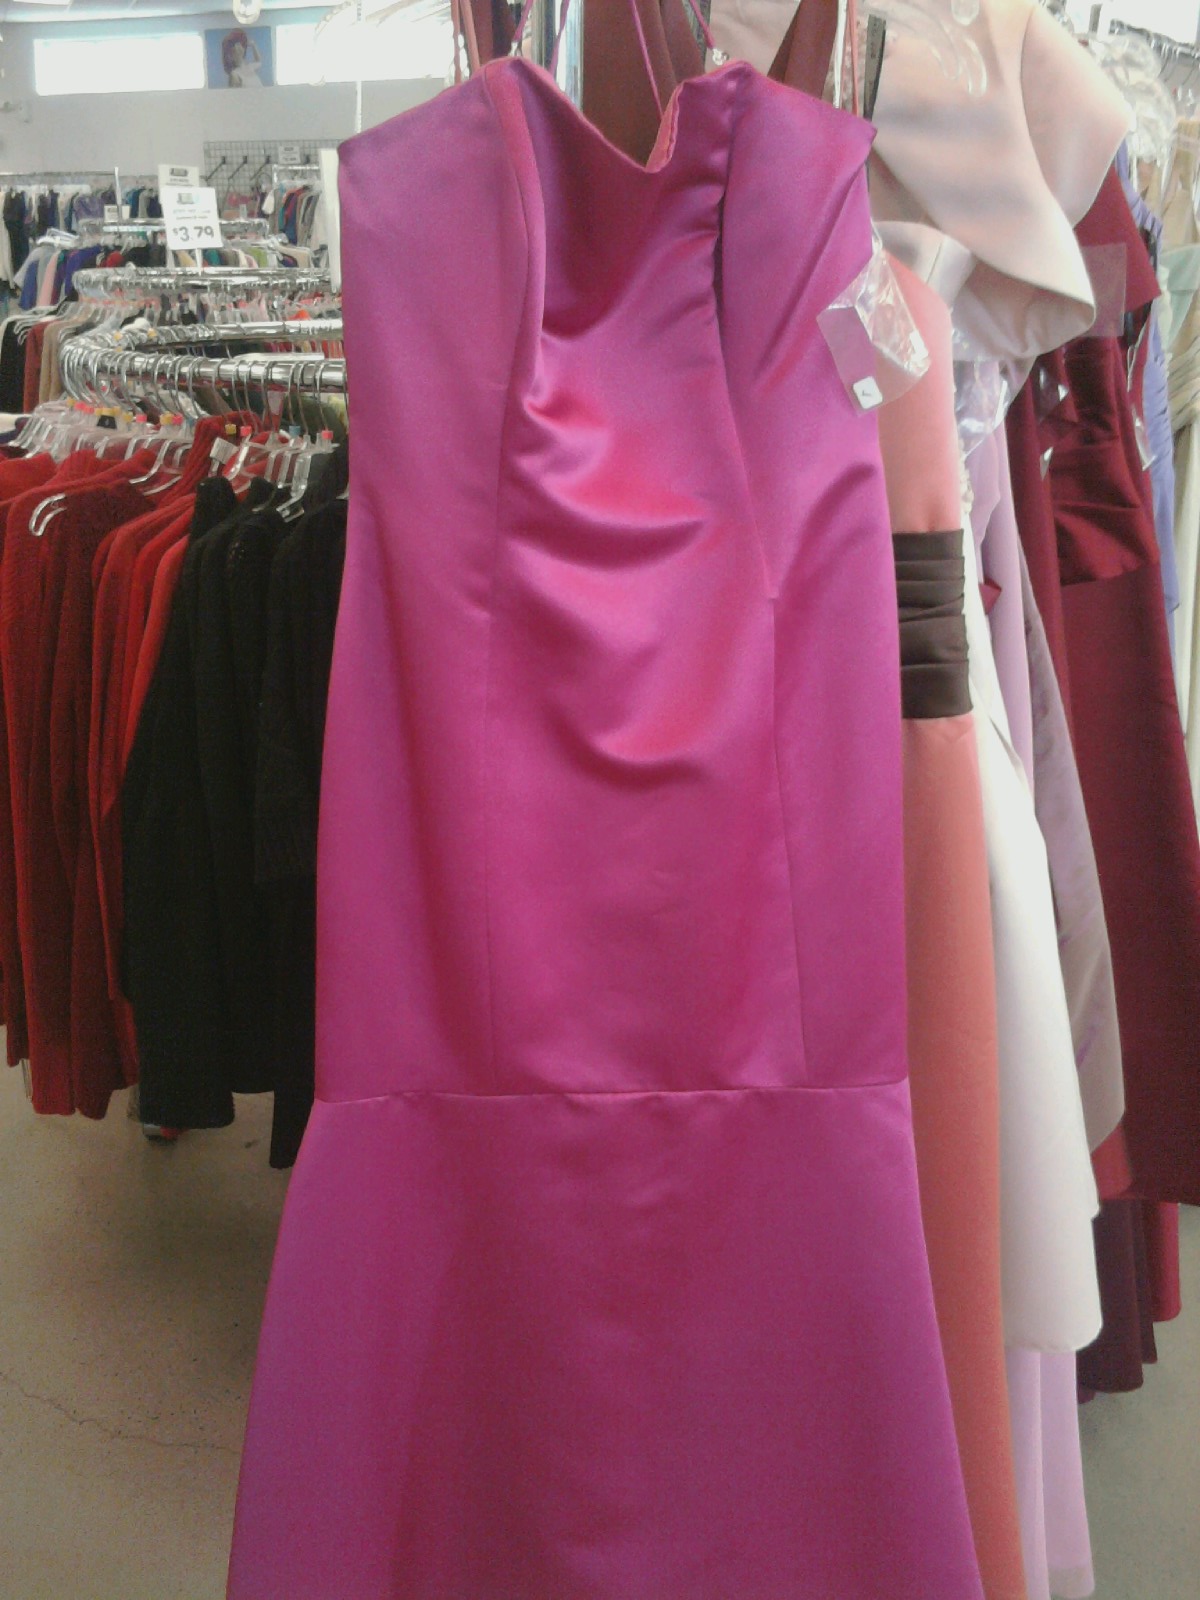 Prom fashions at Goodwill Wow Goodwill